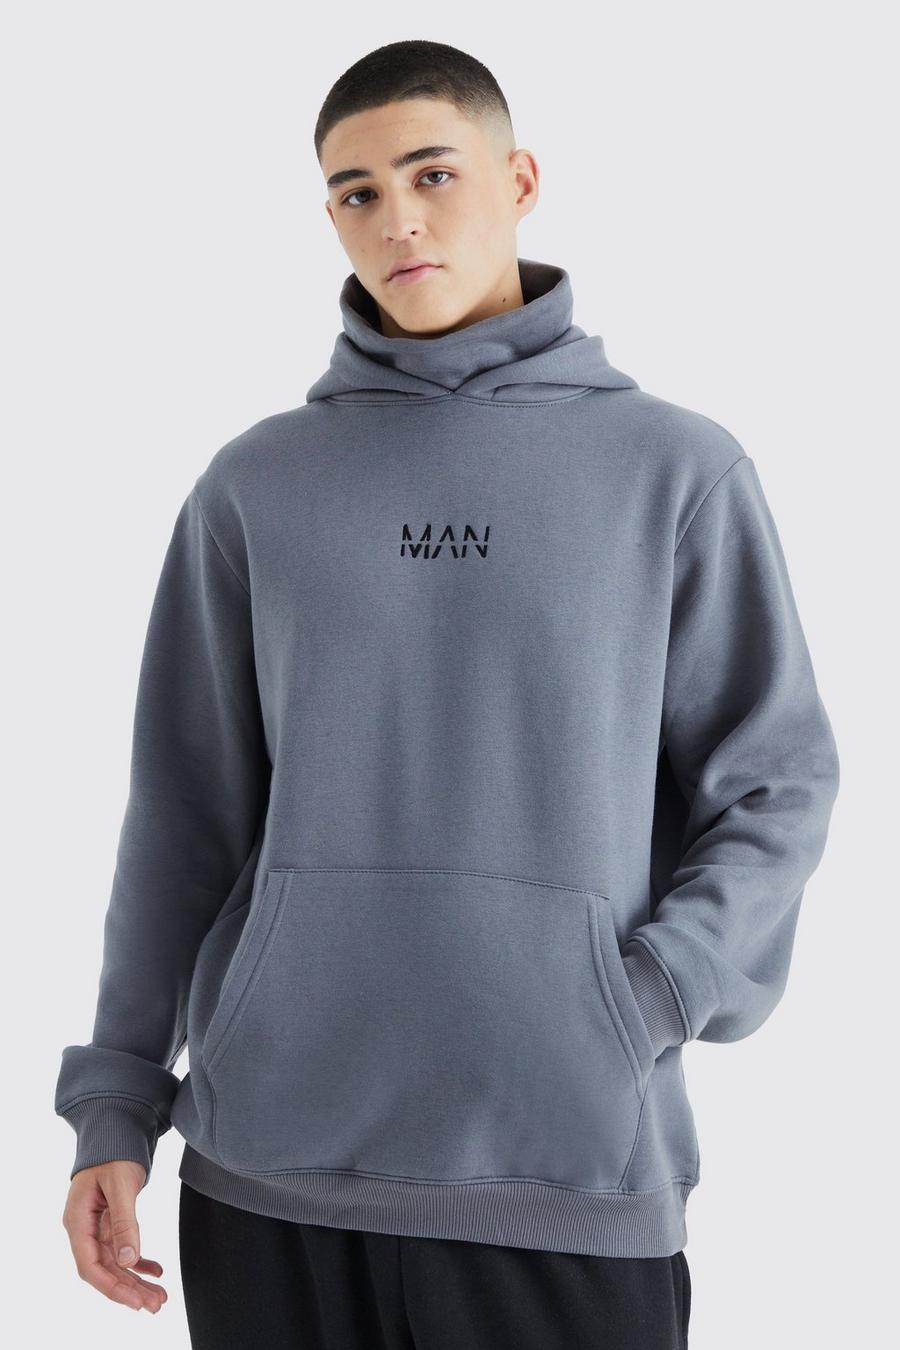 Man Official Jersey Hoodie mit Snood, Charcoal